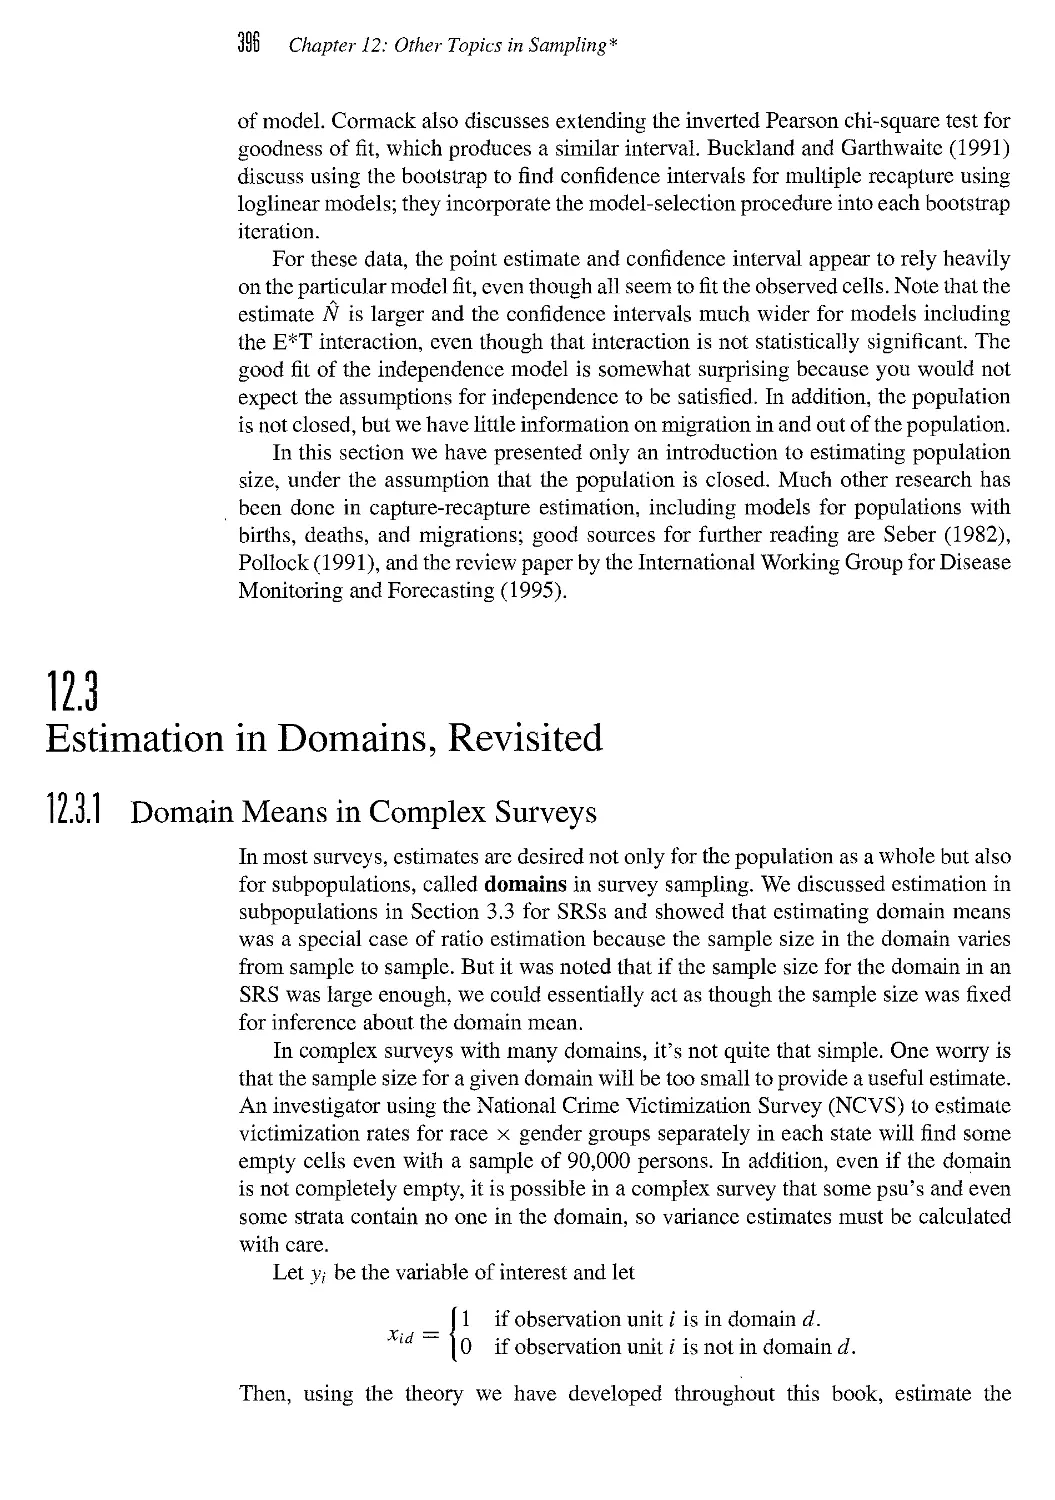 12.3 Estimation in Domains, Revisited